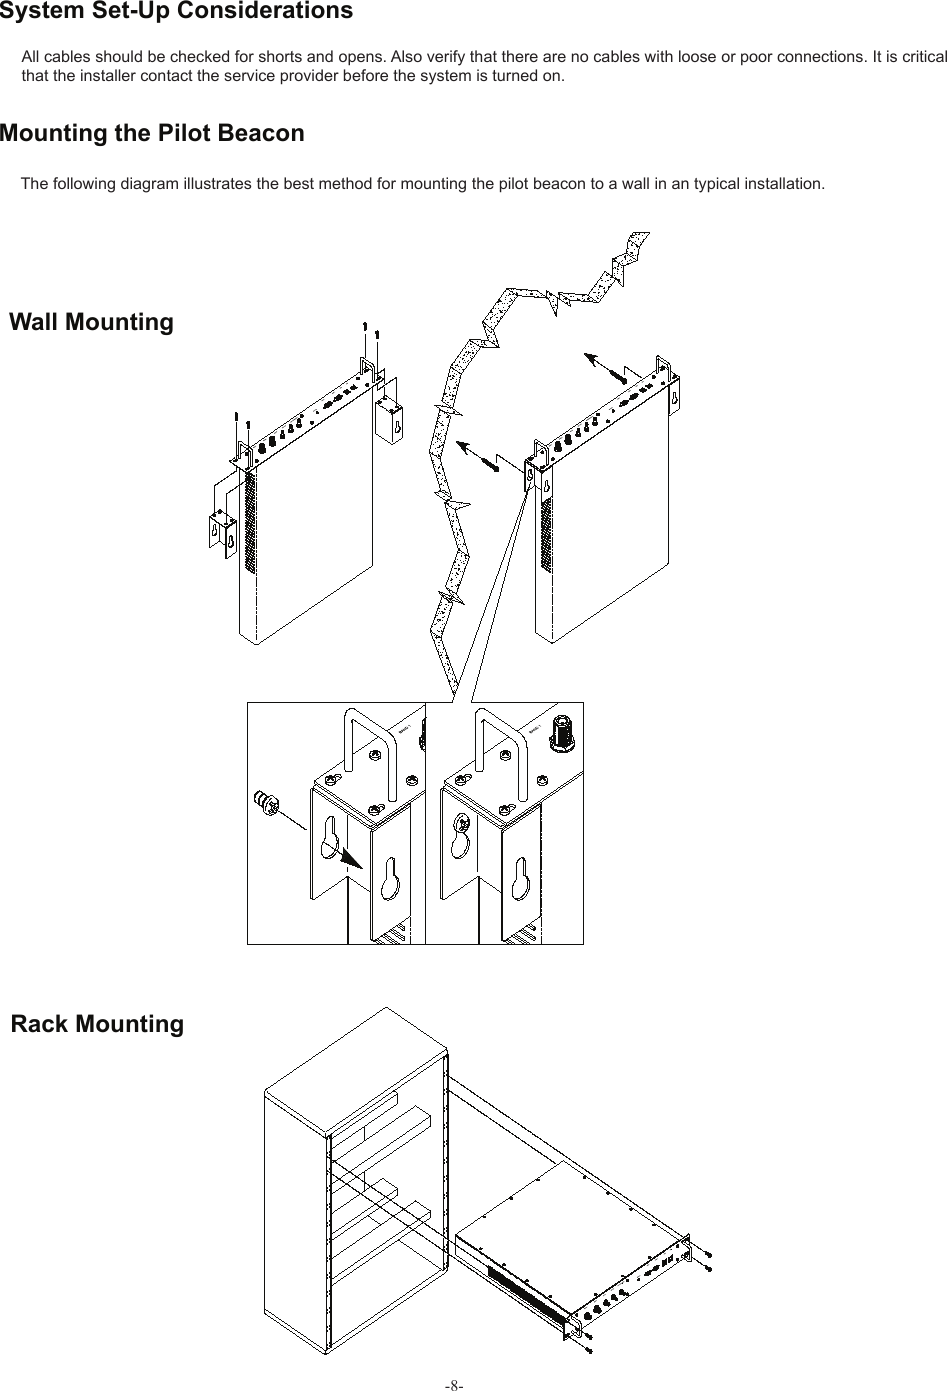 -8-All cables should be checked for shorts and opens. Also verify that there are no cables with loose or poor connections. It is critical that the installer contact the service provider before the system is turned on.The following diagram illustrates the best method for mounting the pilot beacon to a wall in an typical installation.  System Set-Up ConsiderationsMounting the Pilot Beacon Wall Mounting Rack Mounting